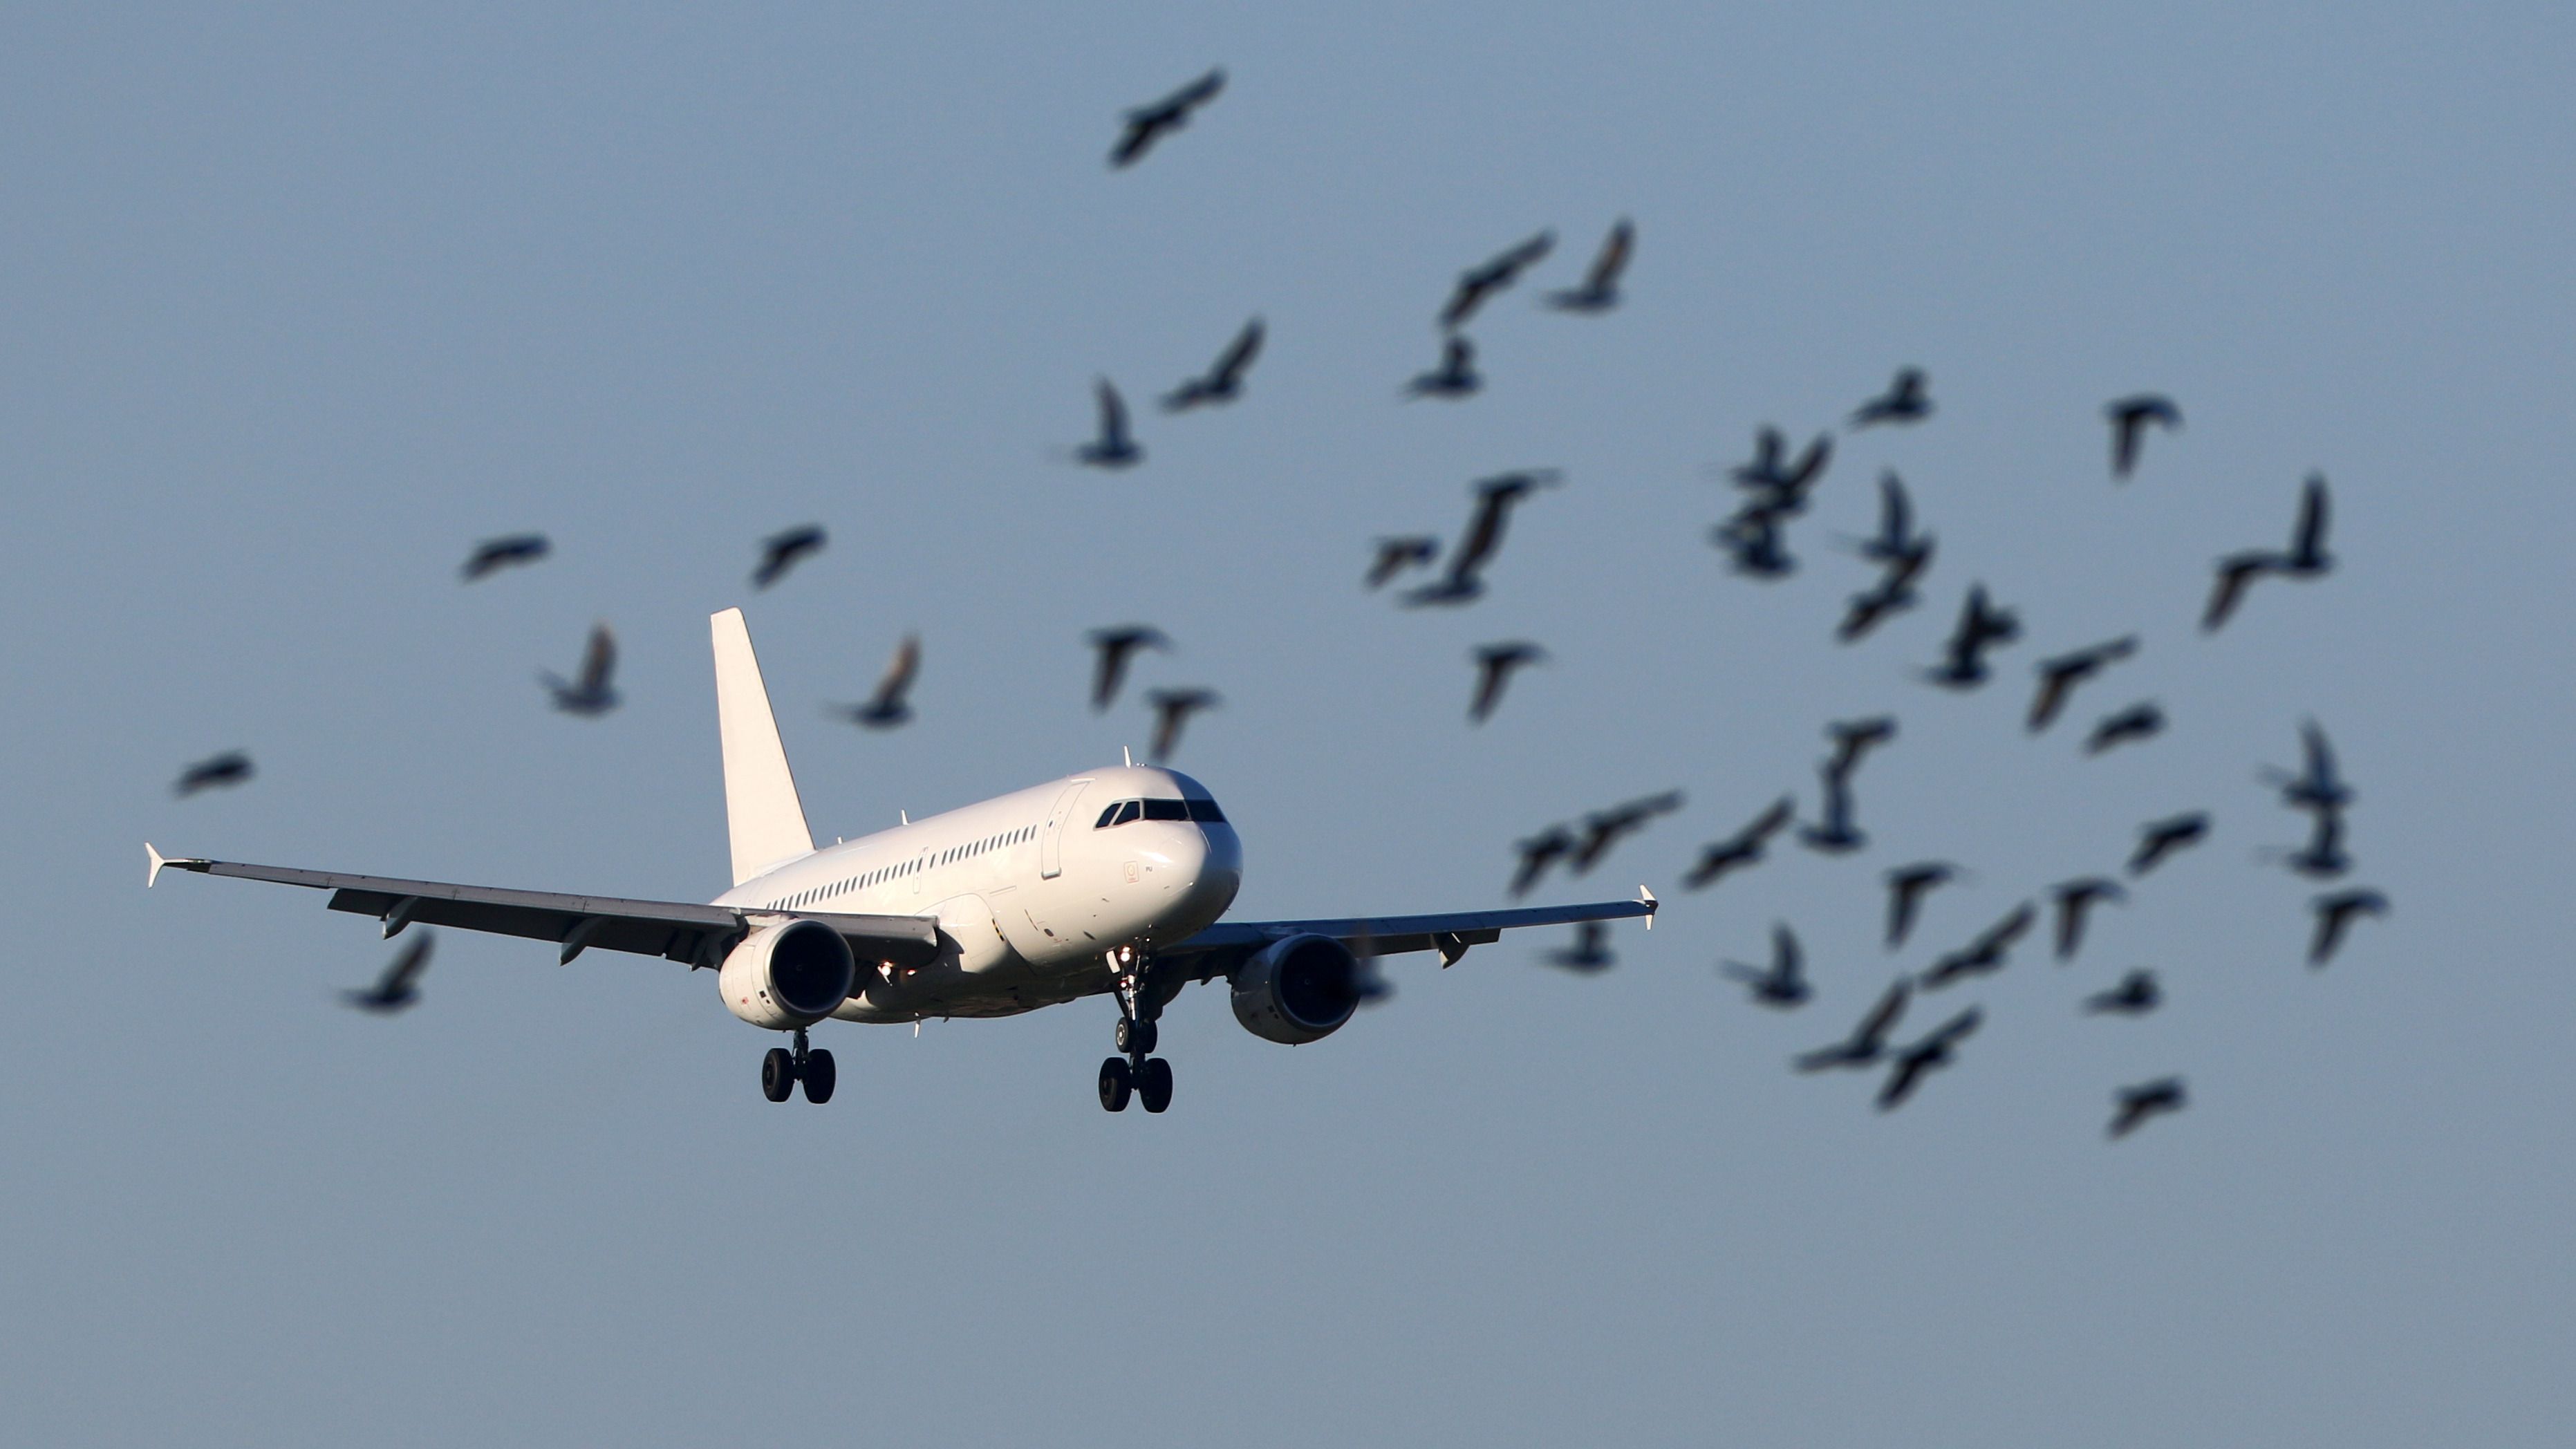 An aircraft landing in the back, while a flock of birds fly in the front 